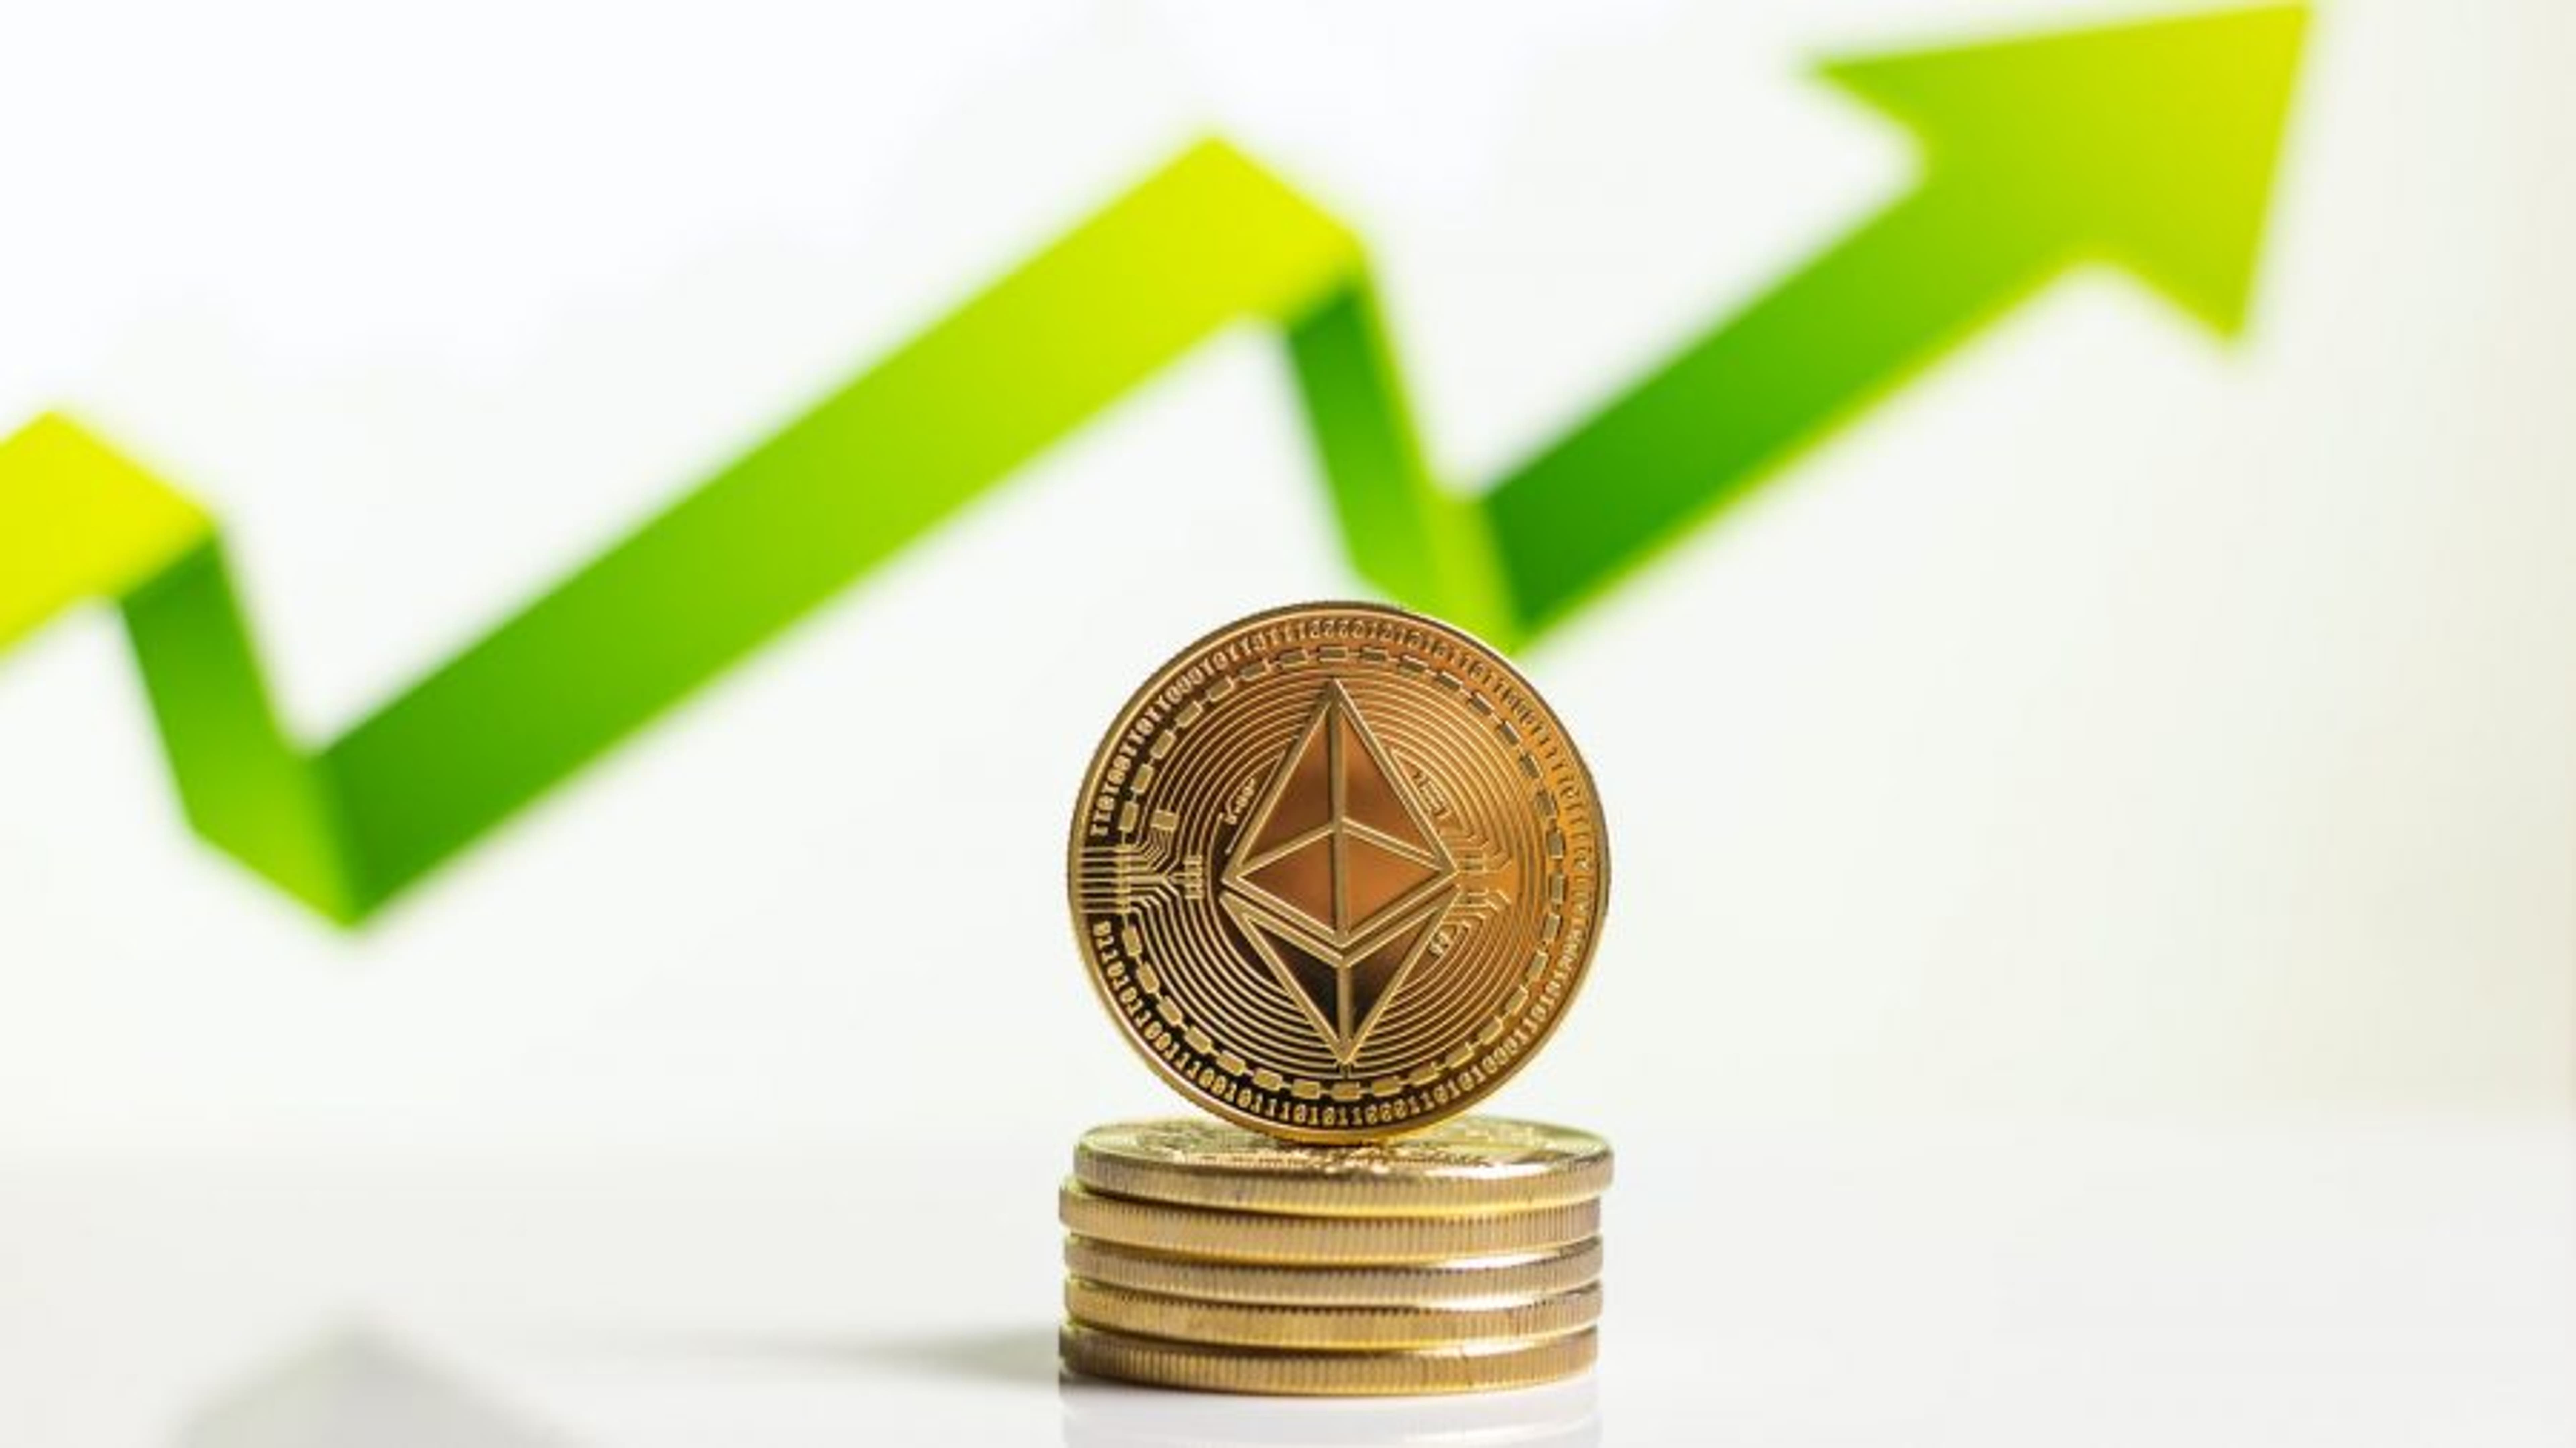 How to Buy Ethereum With an IRA